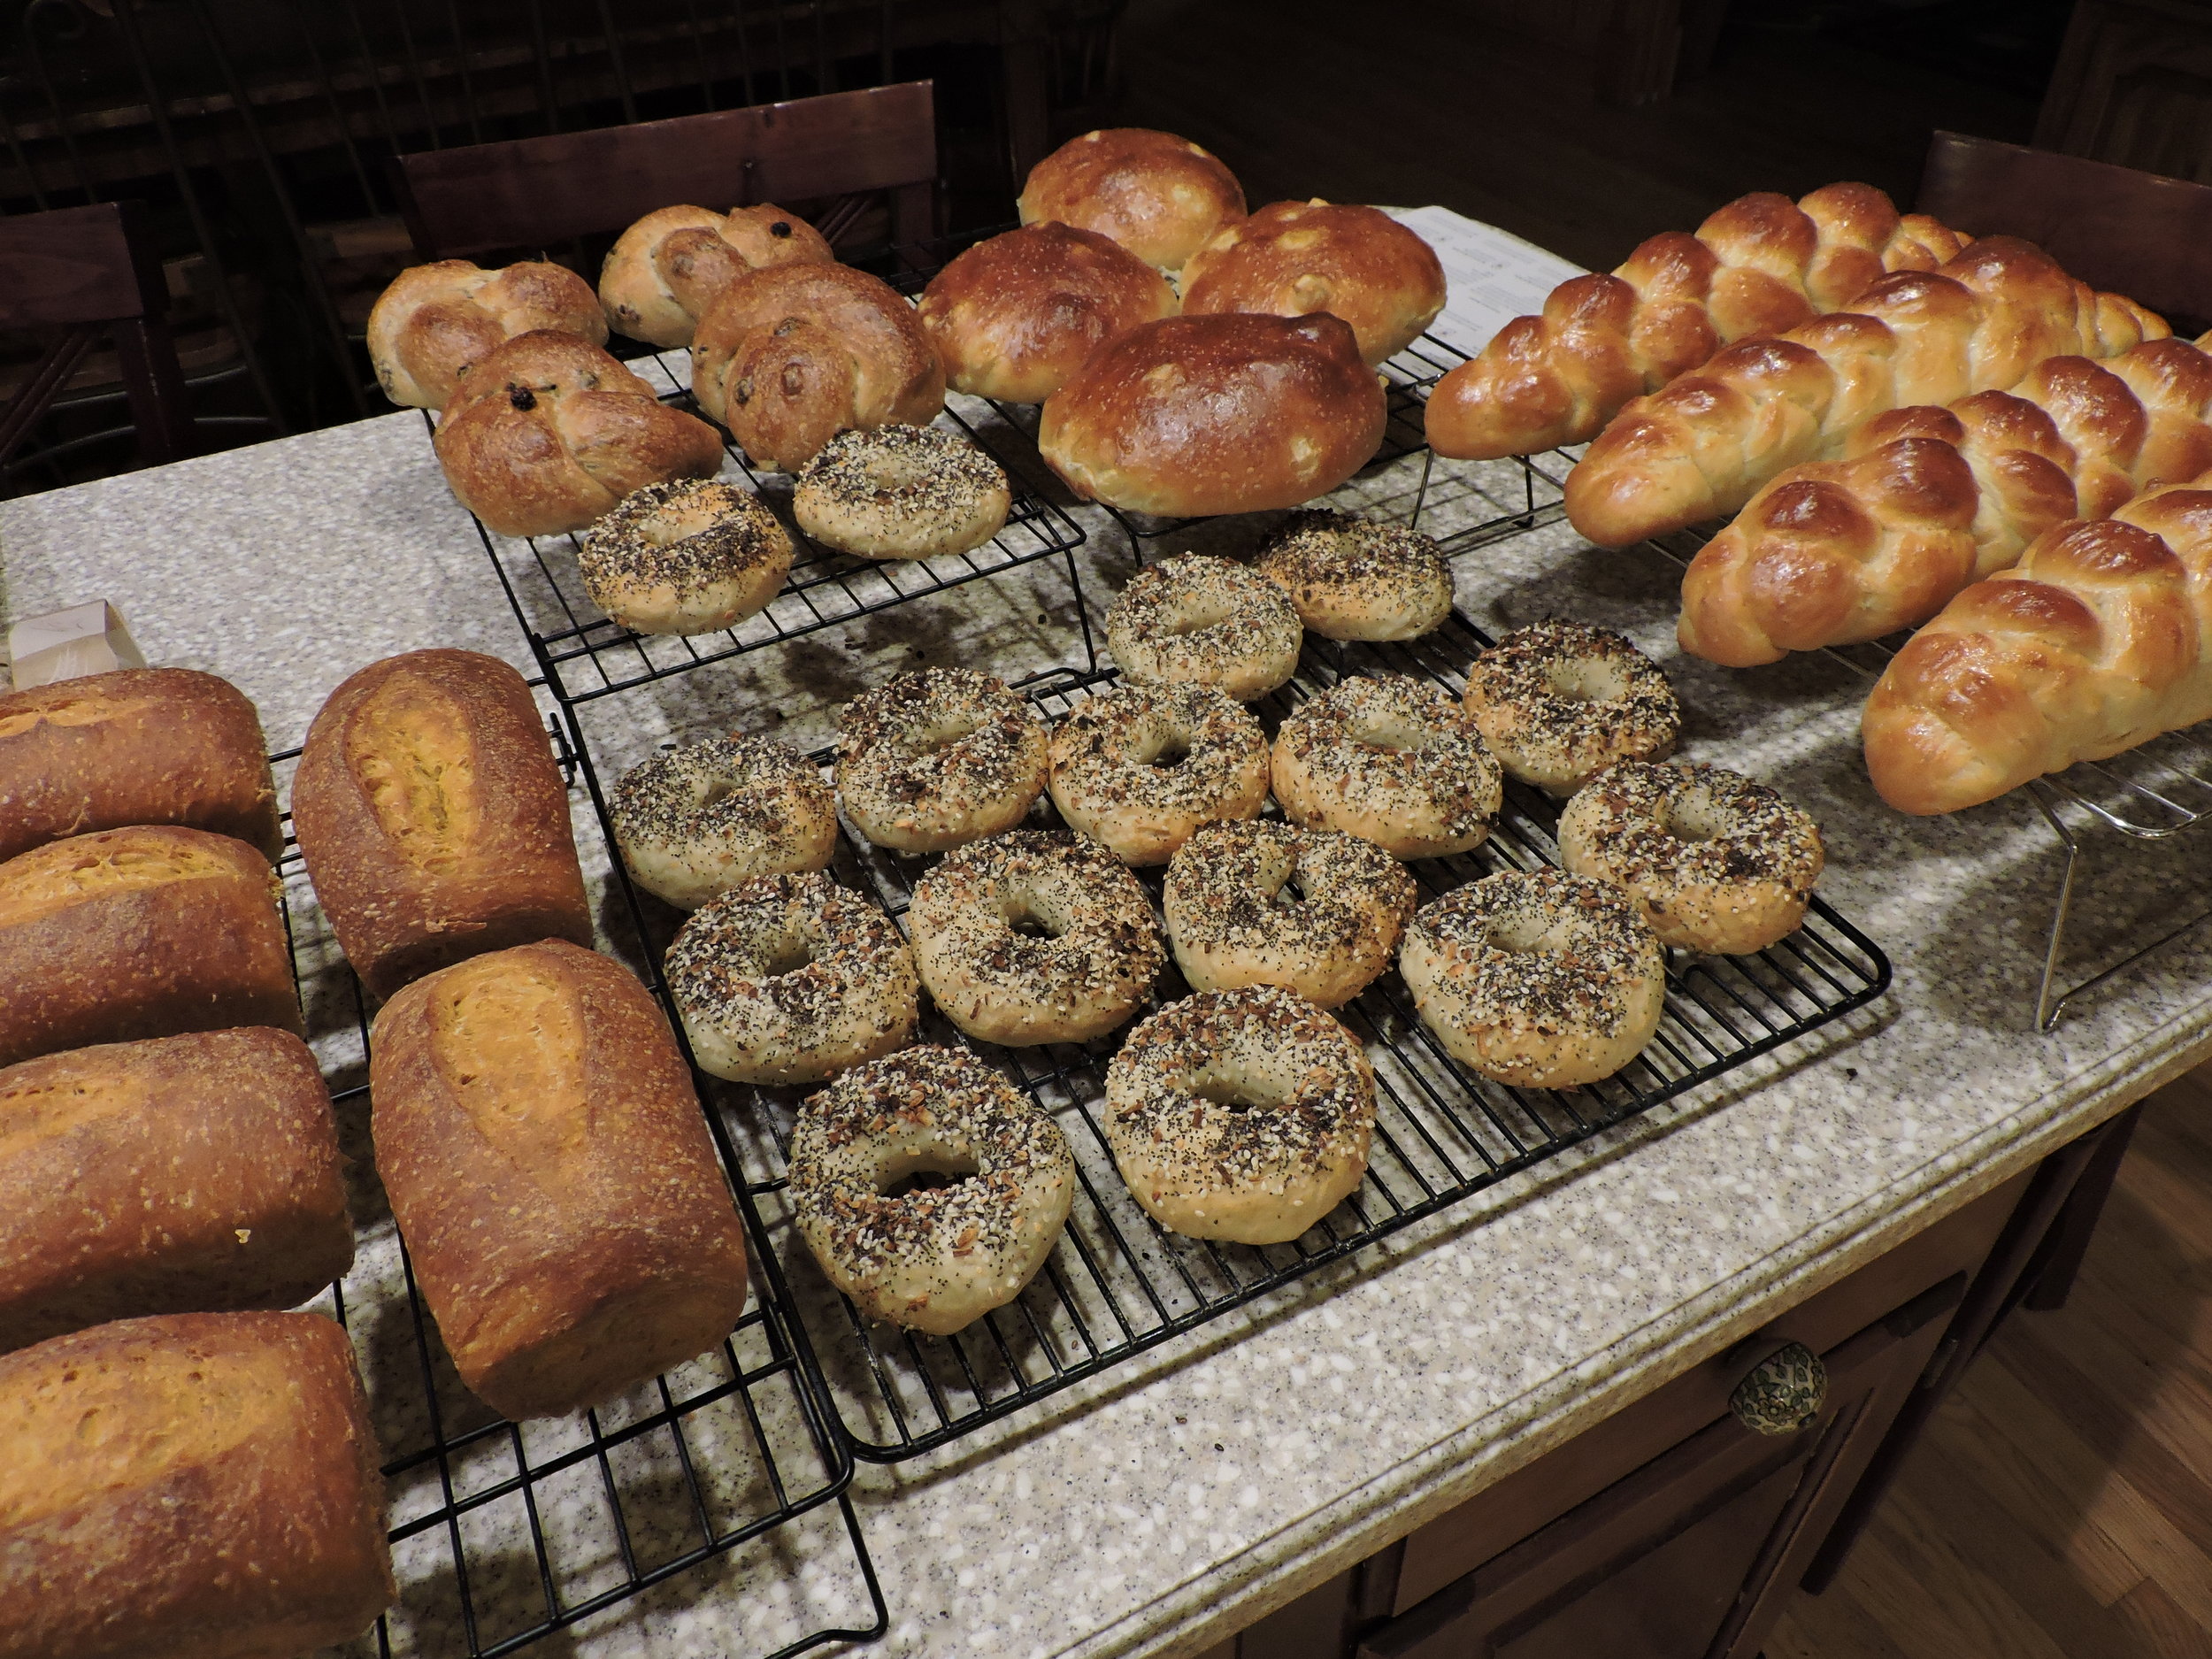  Pumpkin loaves (left), everything bagels (middle), cinnamon raisin knots (back left), apple honey challahs (back right), and plain challah braids (right). 